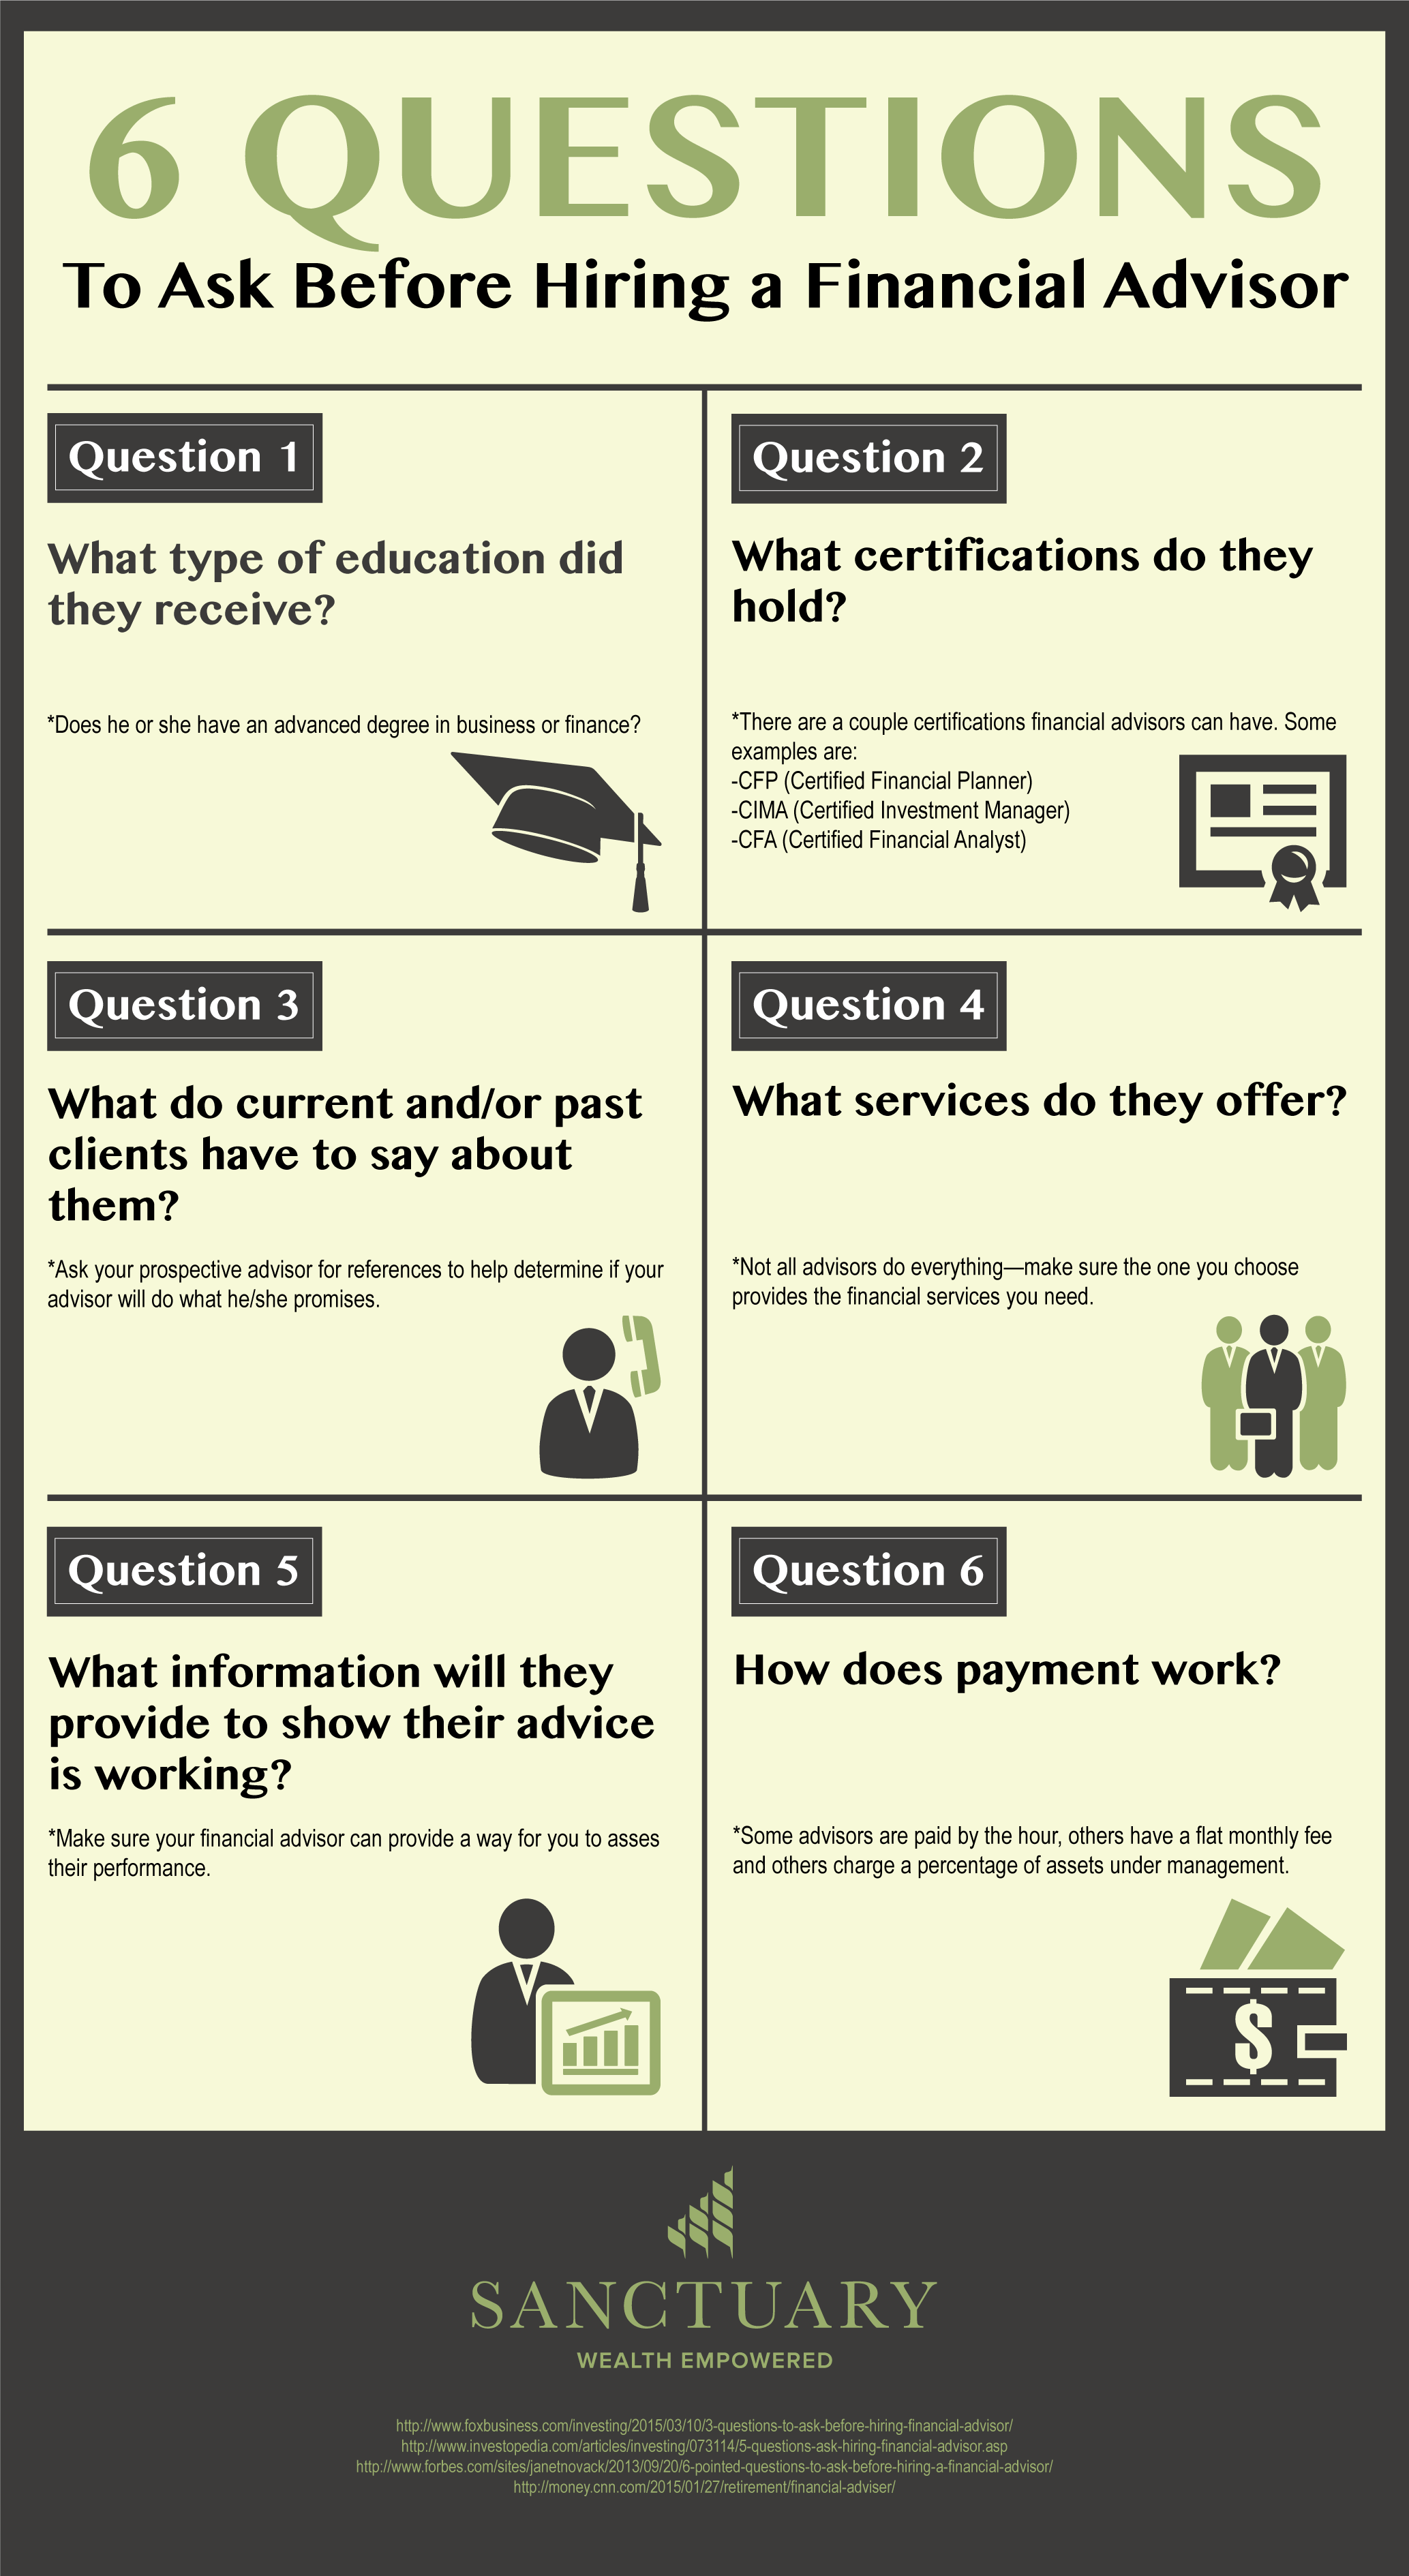 https://i.visual.ly/images/6-questions-to-ask-before-hiring-a-financial-advisor_5572085d97750.png